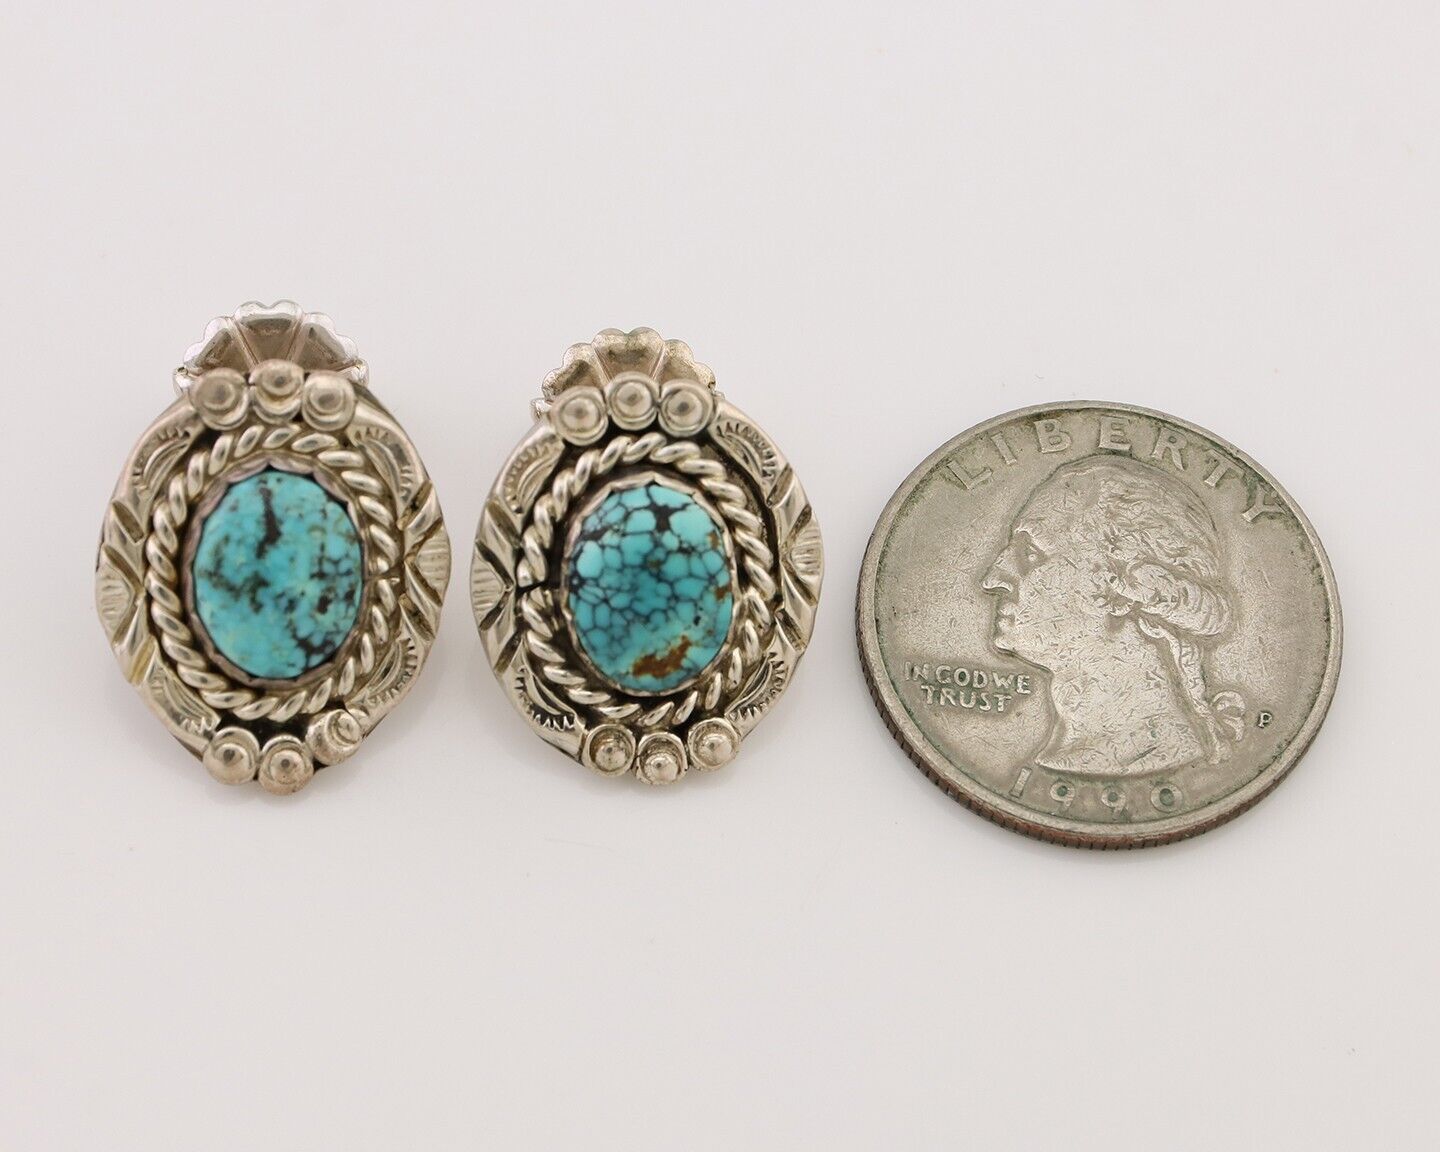 Navajo Earrings 925 Silver Spiderweb Mined Turquoise Artist Signed NE C.80's